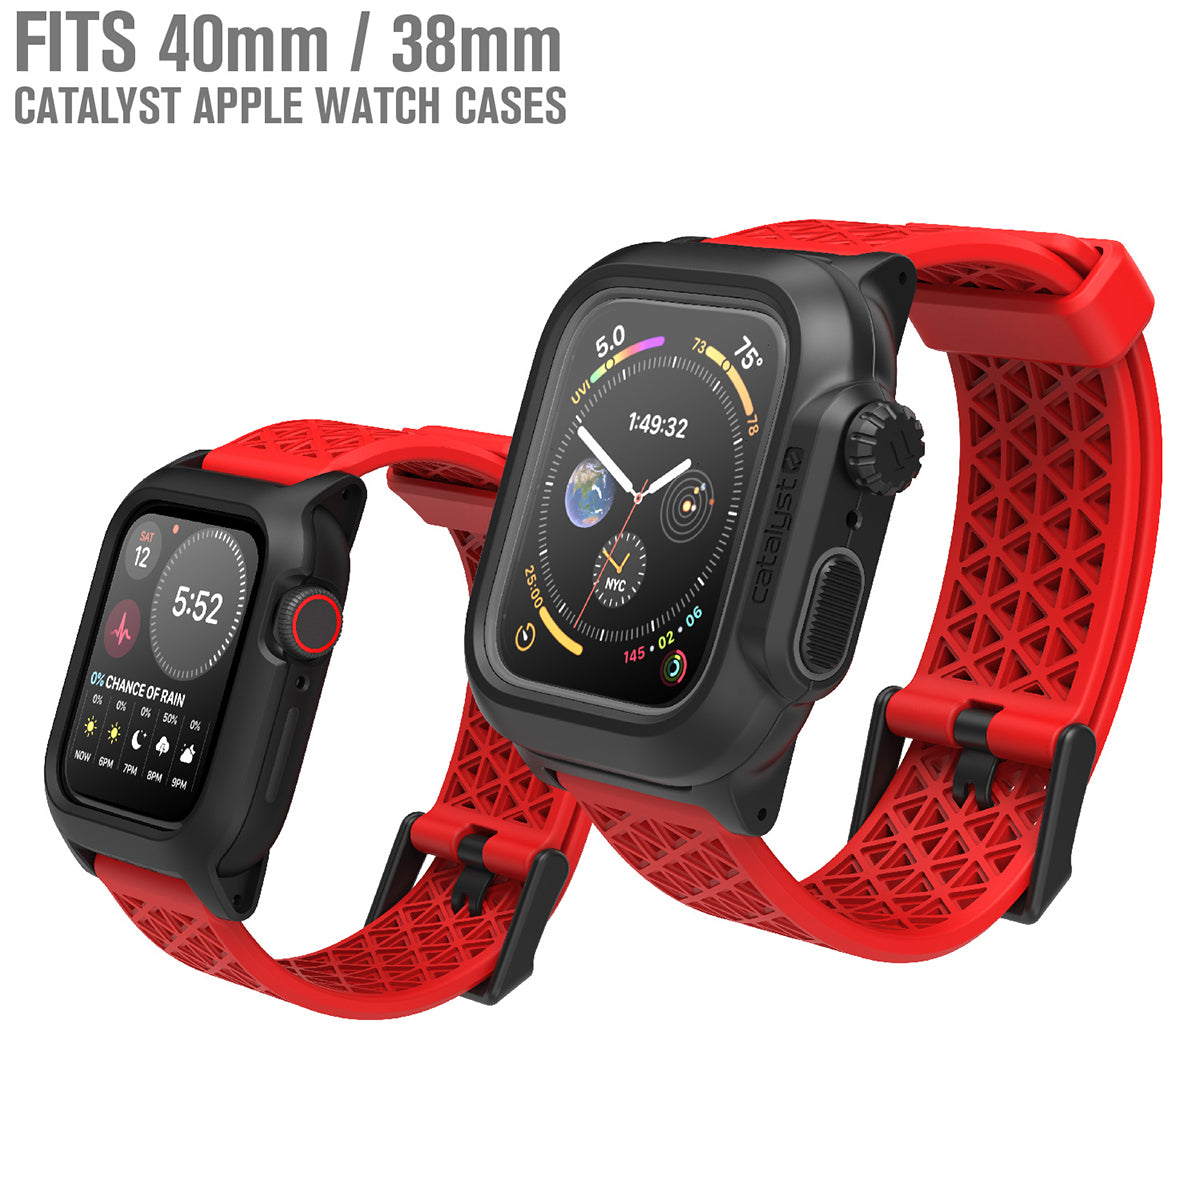 catalyst apple watch series 9 8 7 6 5 4 SE Gen 2 1 38 40 41mm sport band buckle edition two apple watch with impact protection and waterproof case with flame red sport band text reads fits 40mm 38mm catalyst apple watch cases